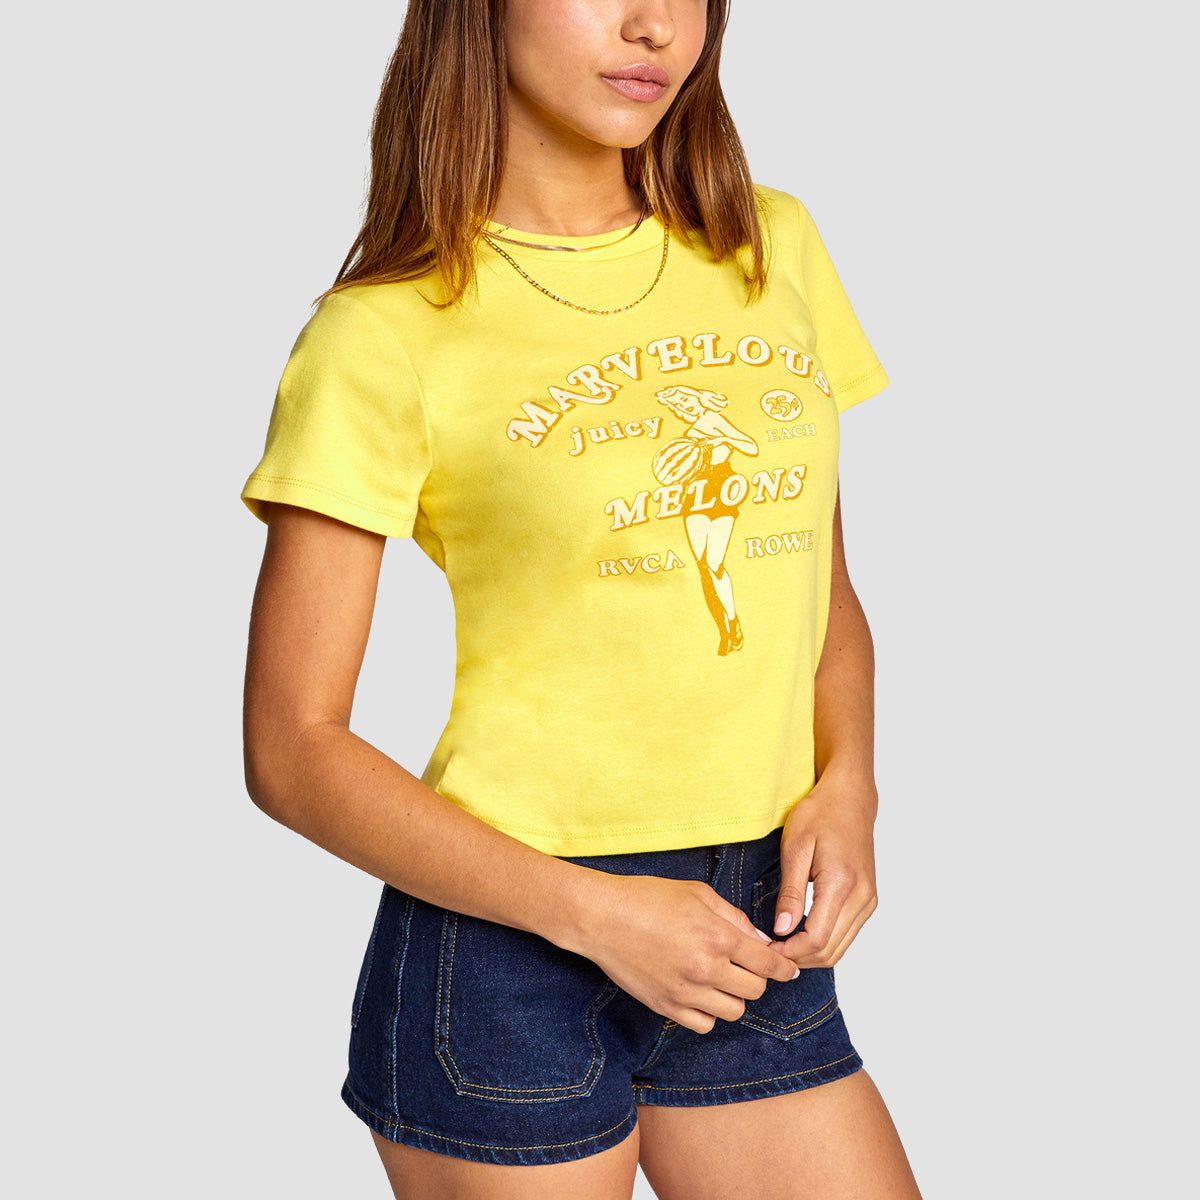 RVCA Camille Rowe Marvellous Melons T-Shirt Yellow Fade - Womens